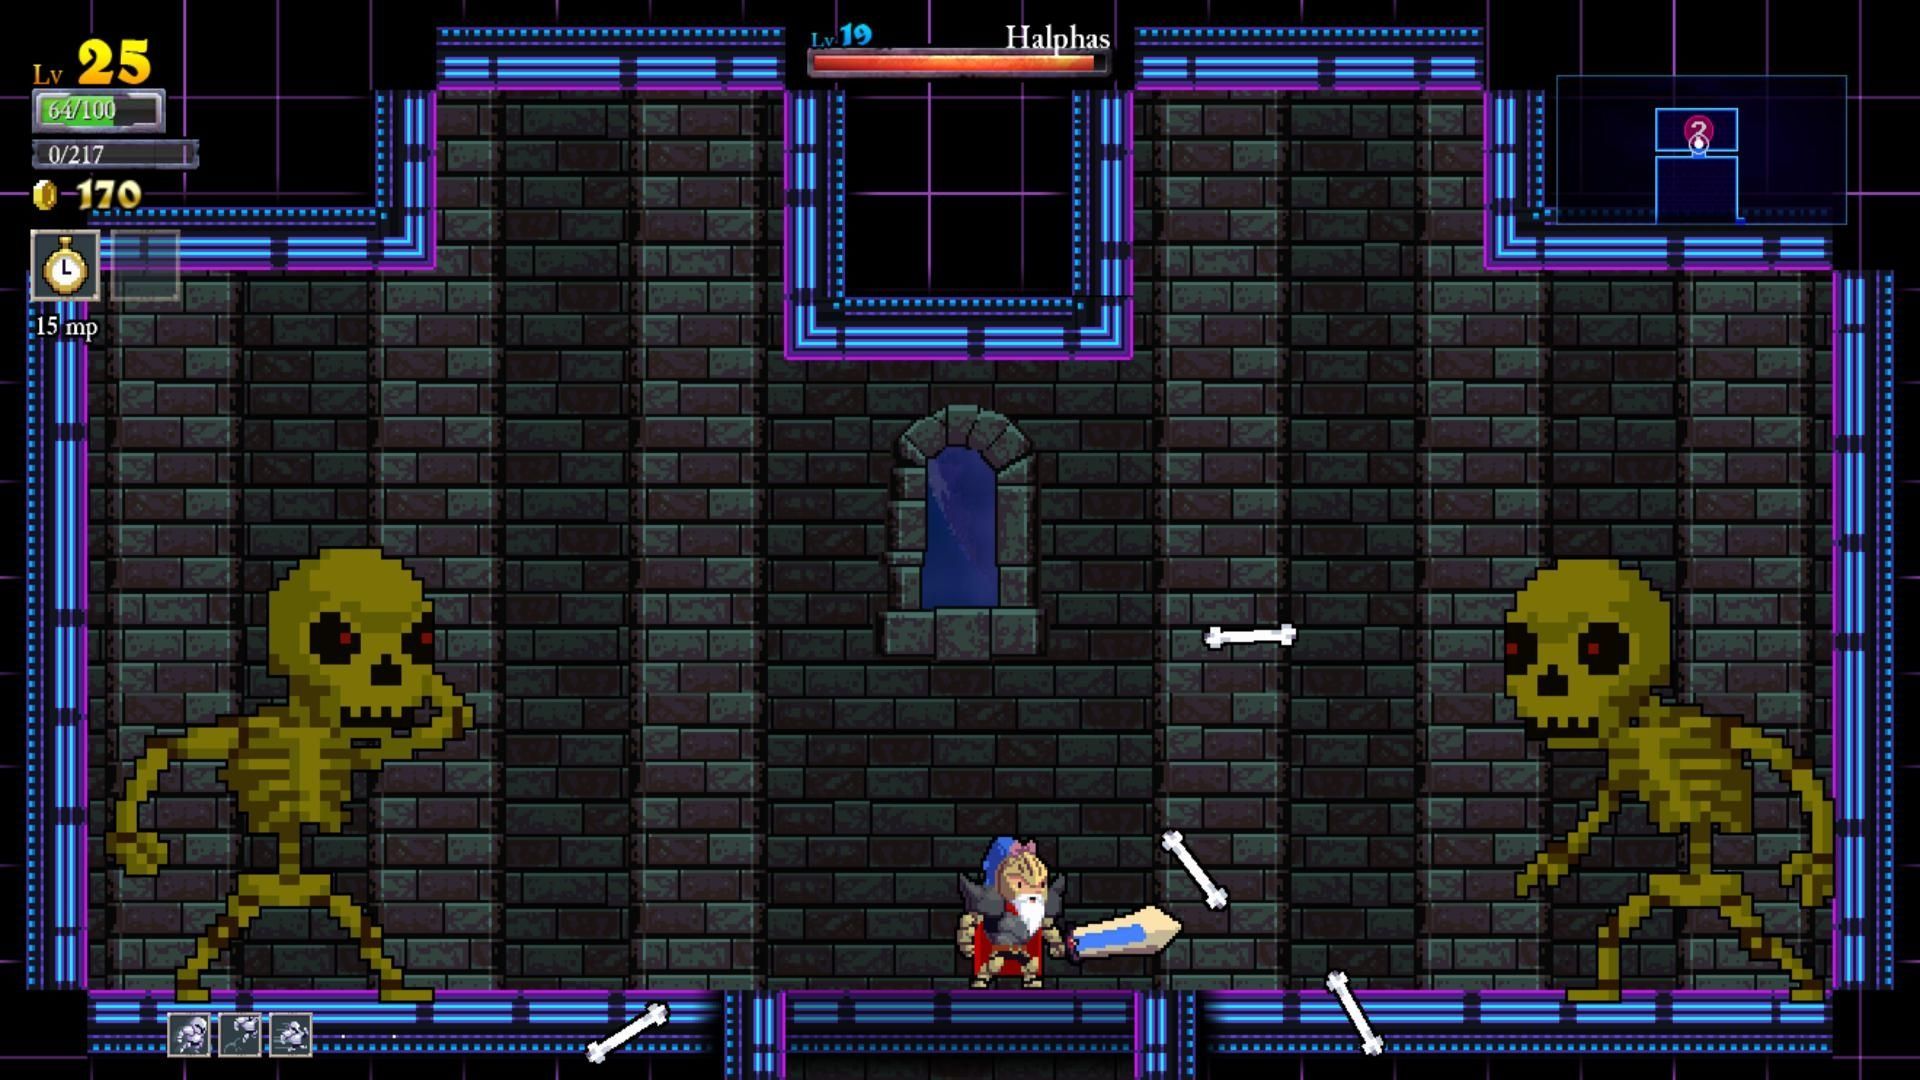 Rogue Legacy 2 for iphone download